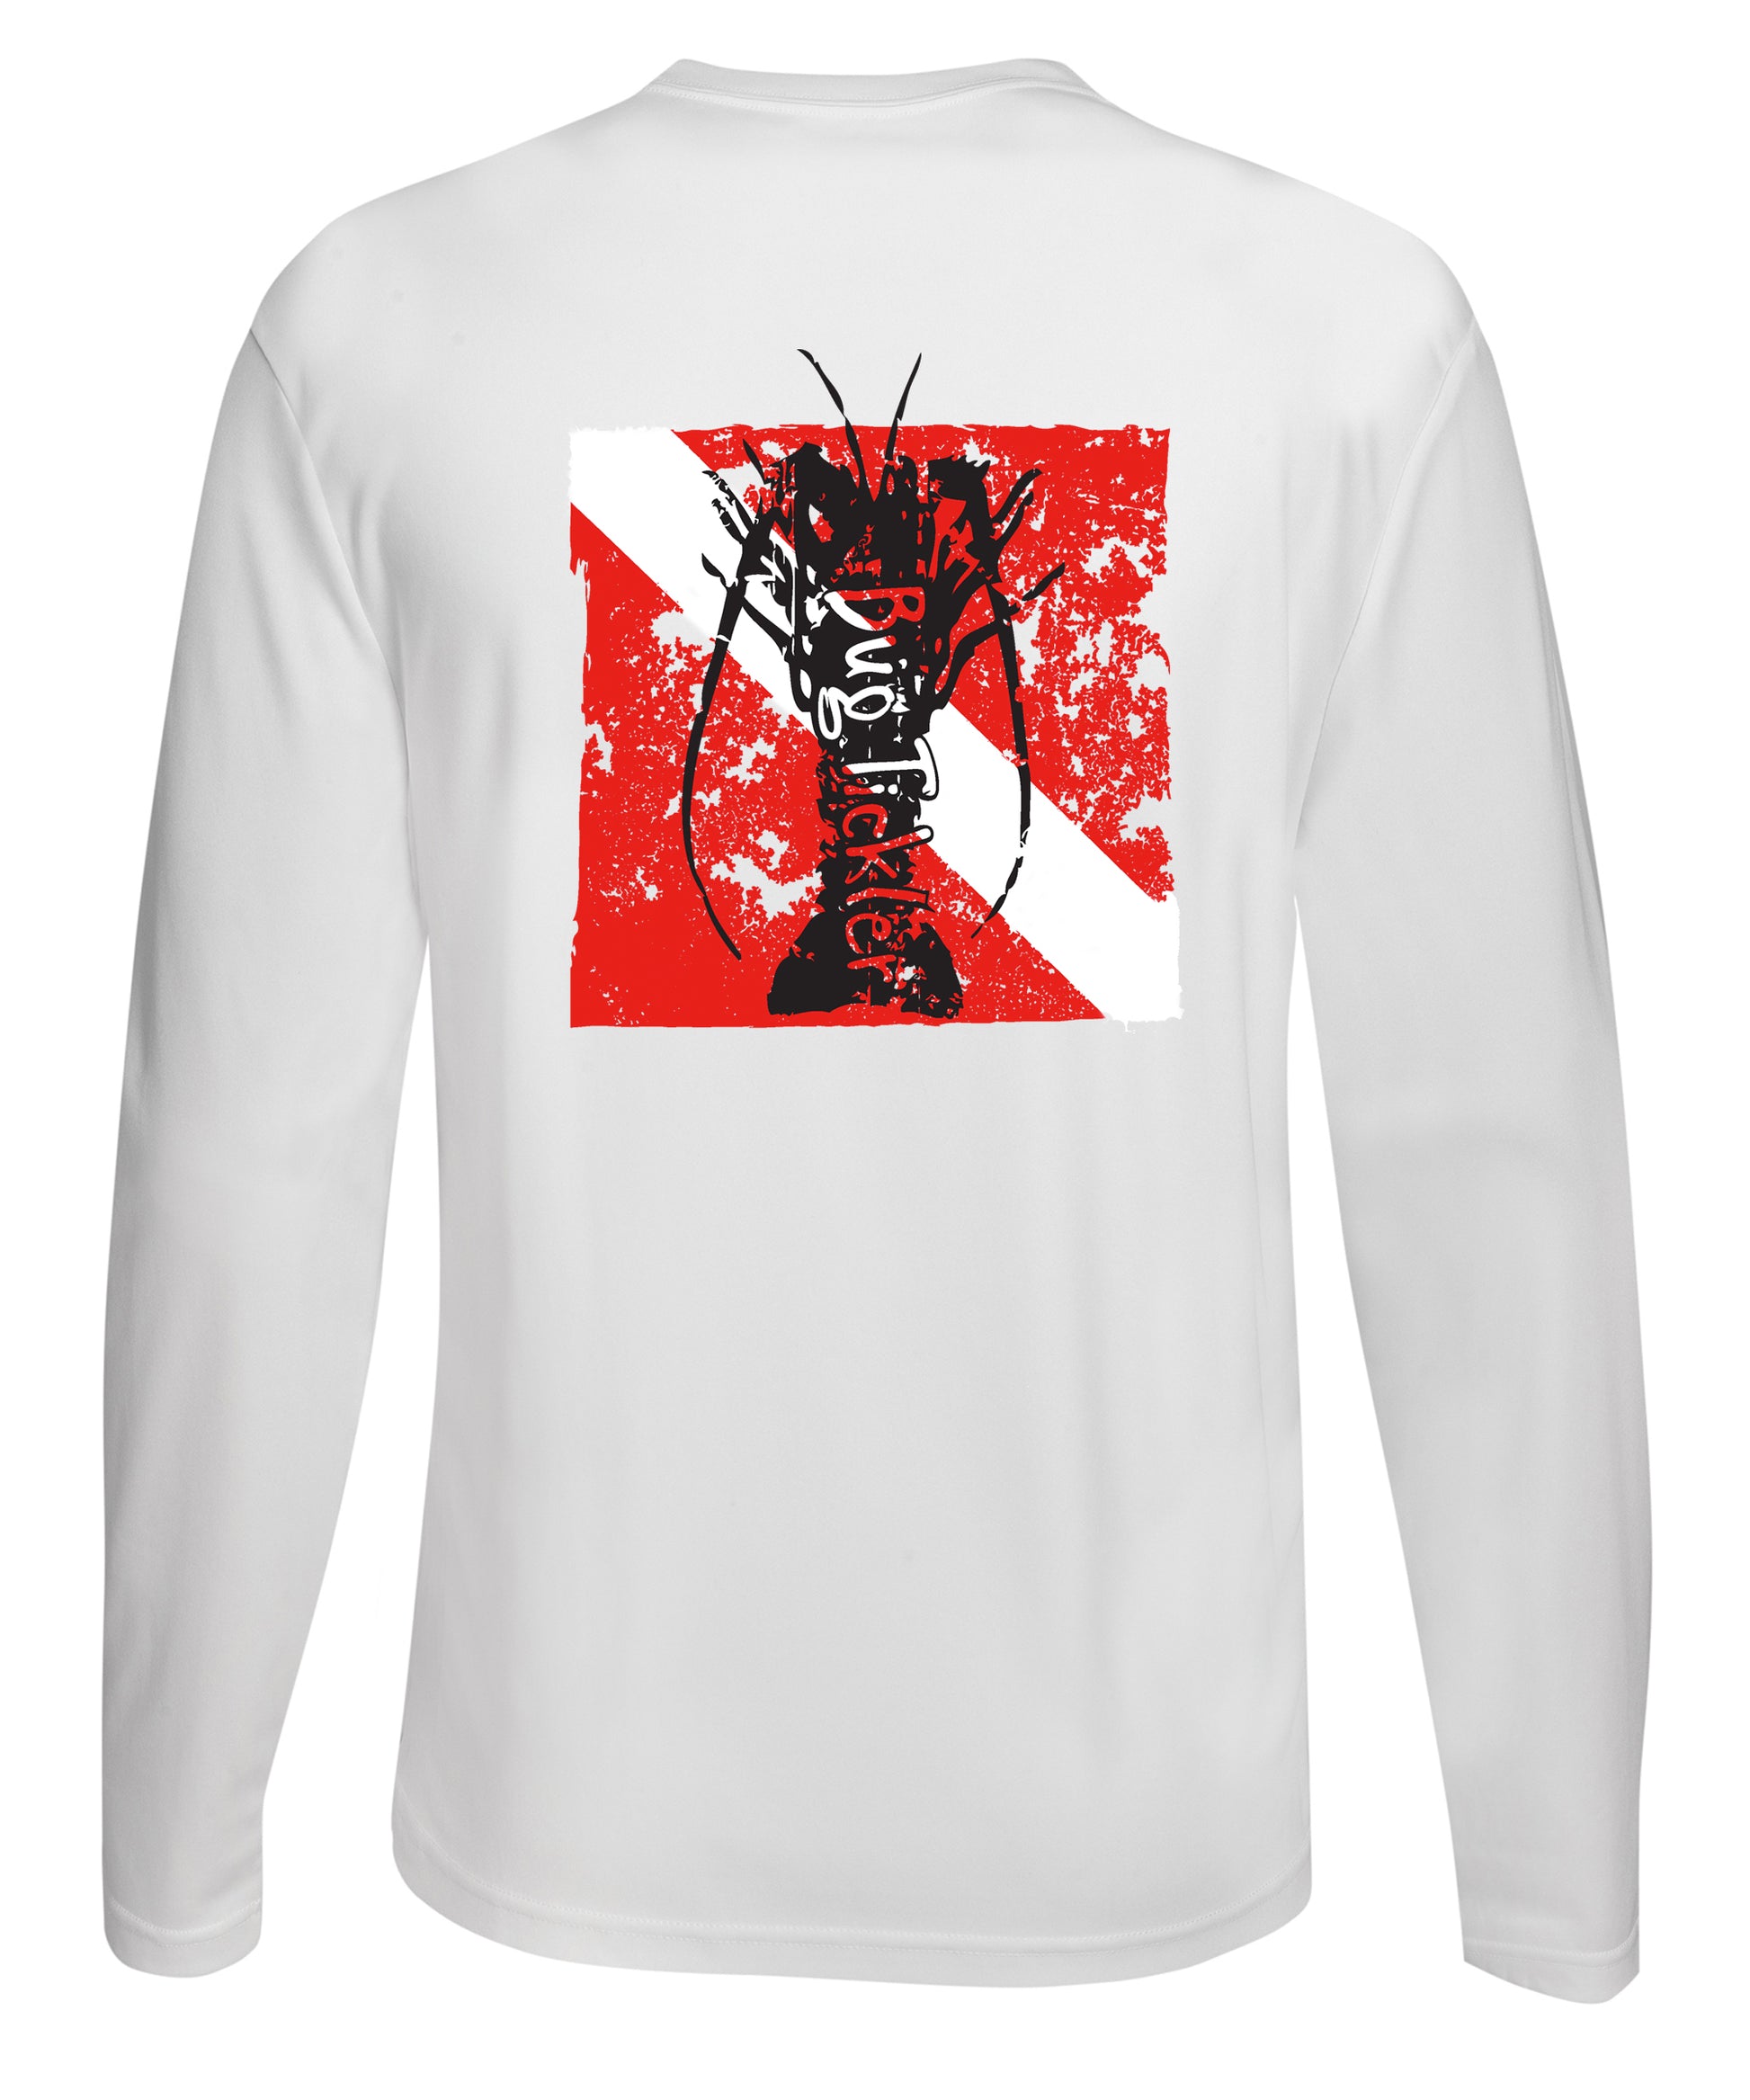 Lobster Performance Dry-Fit Fishing shirts with Sun Protection - "Bug Tickler" Dive Logo - White Long Sleeve